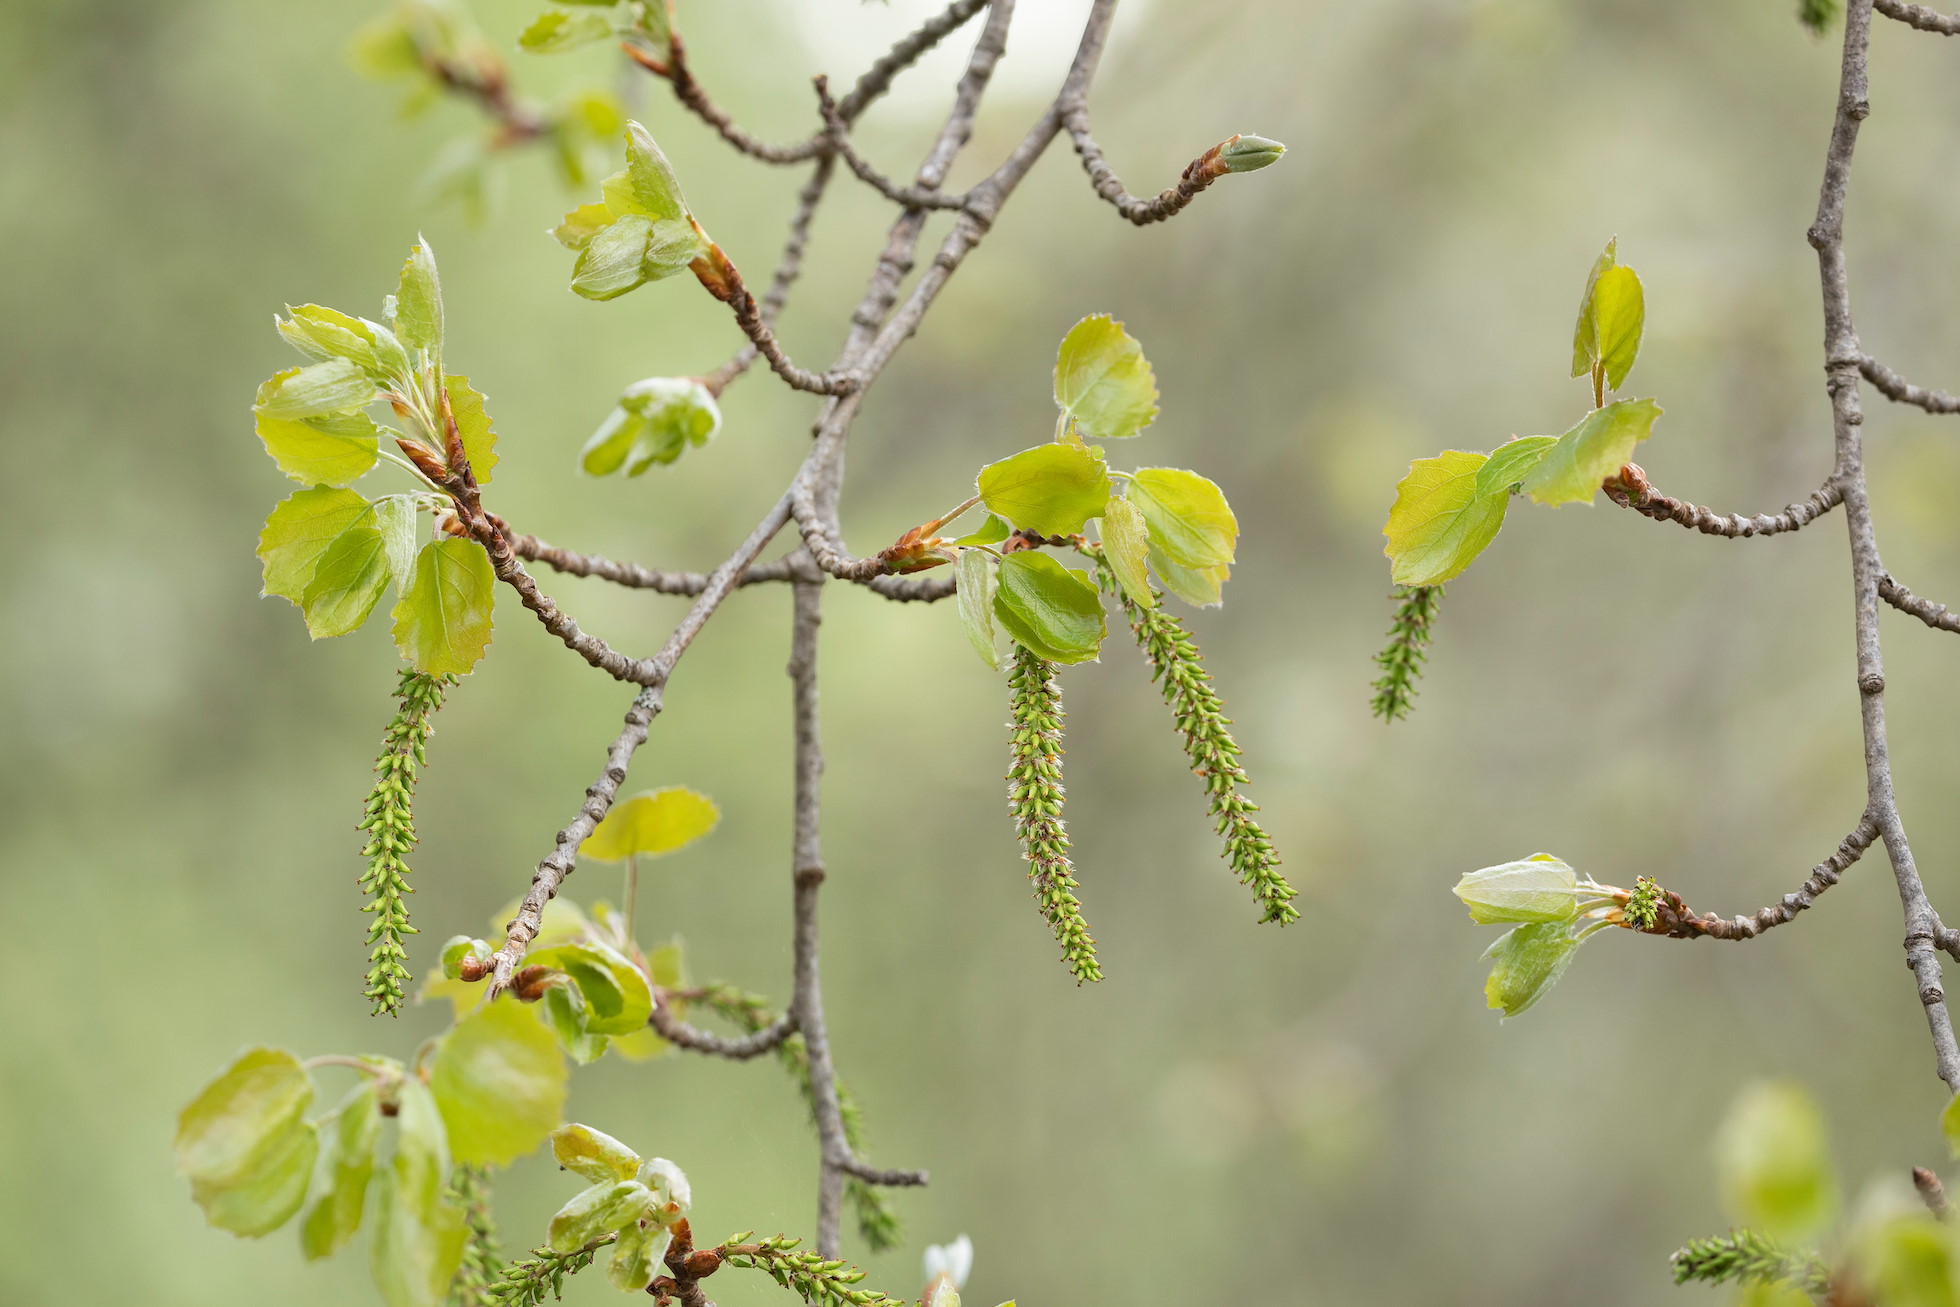 Aspen, Populus tremula, seed-bearing catkins in early spring, Cairngorms National Park